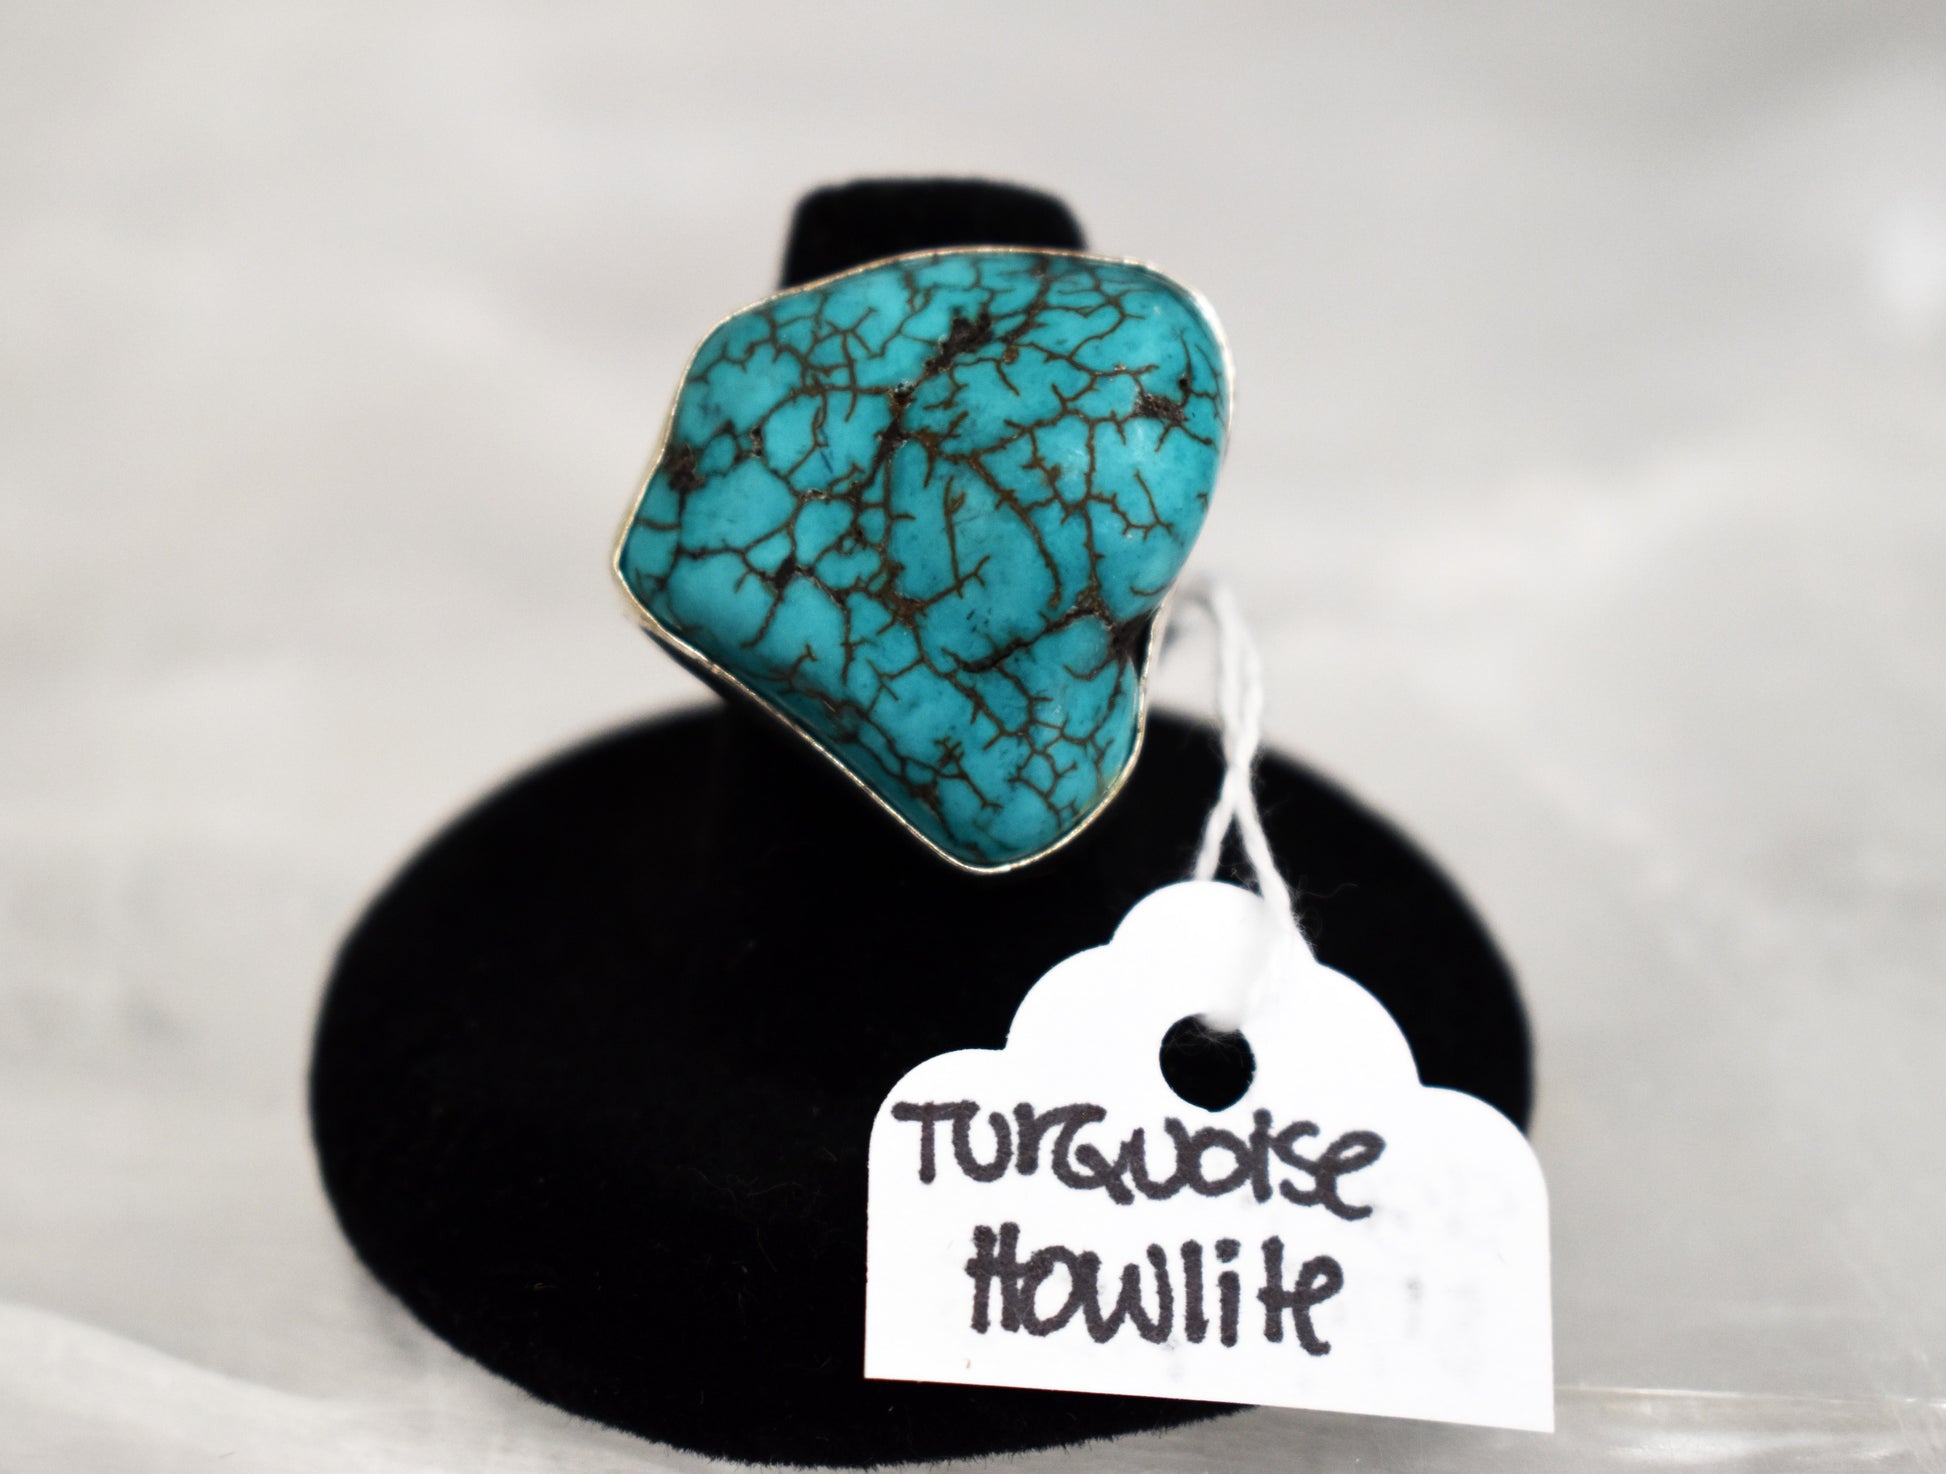 stones-of-transformation - Turquoise Howlite Ring (Size 7.5) - Stones of Transformation - 